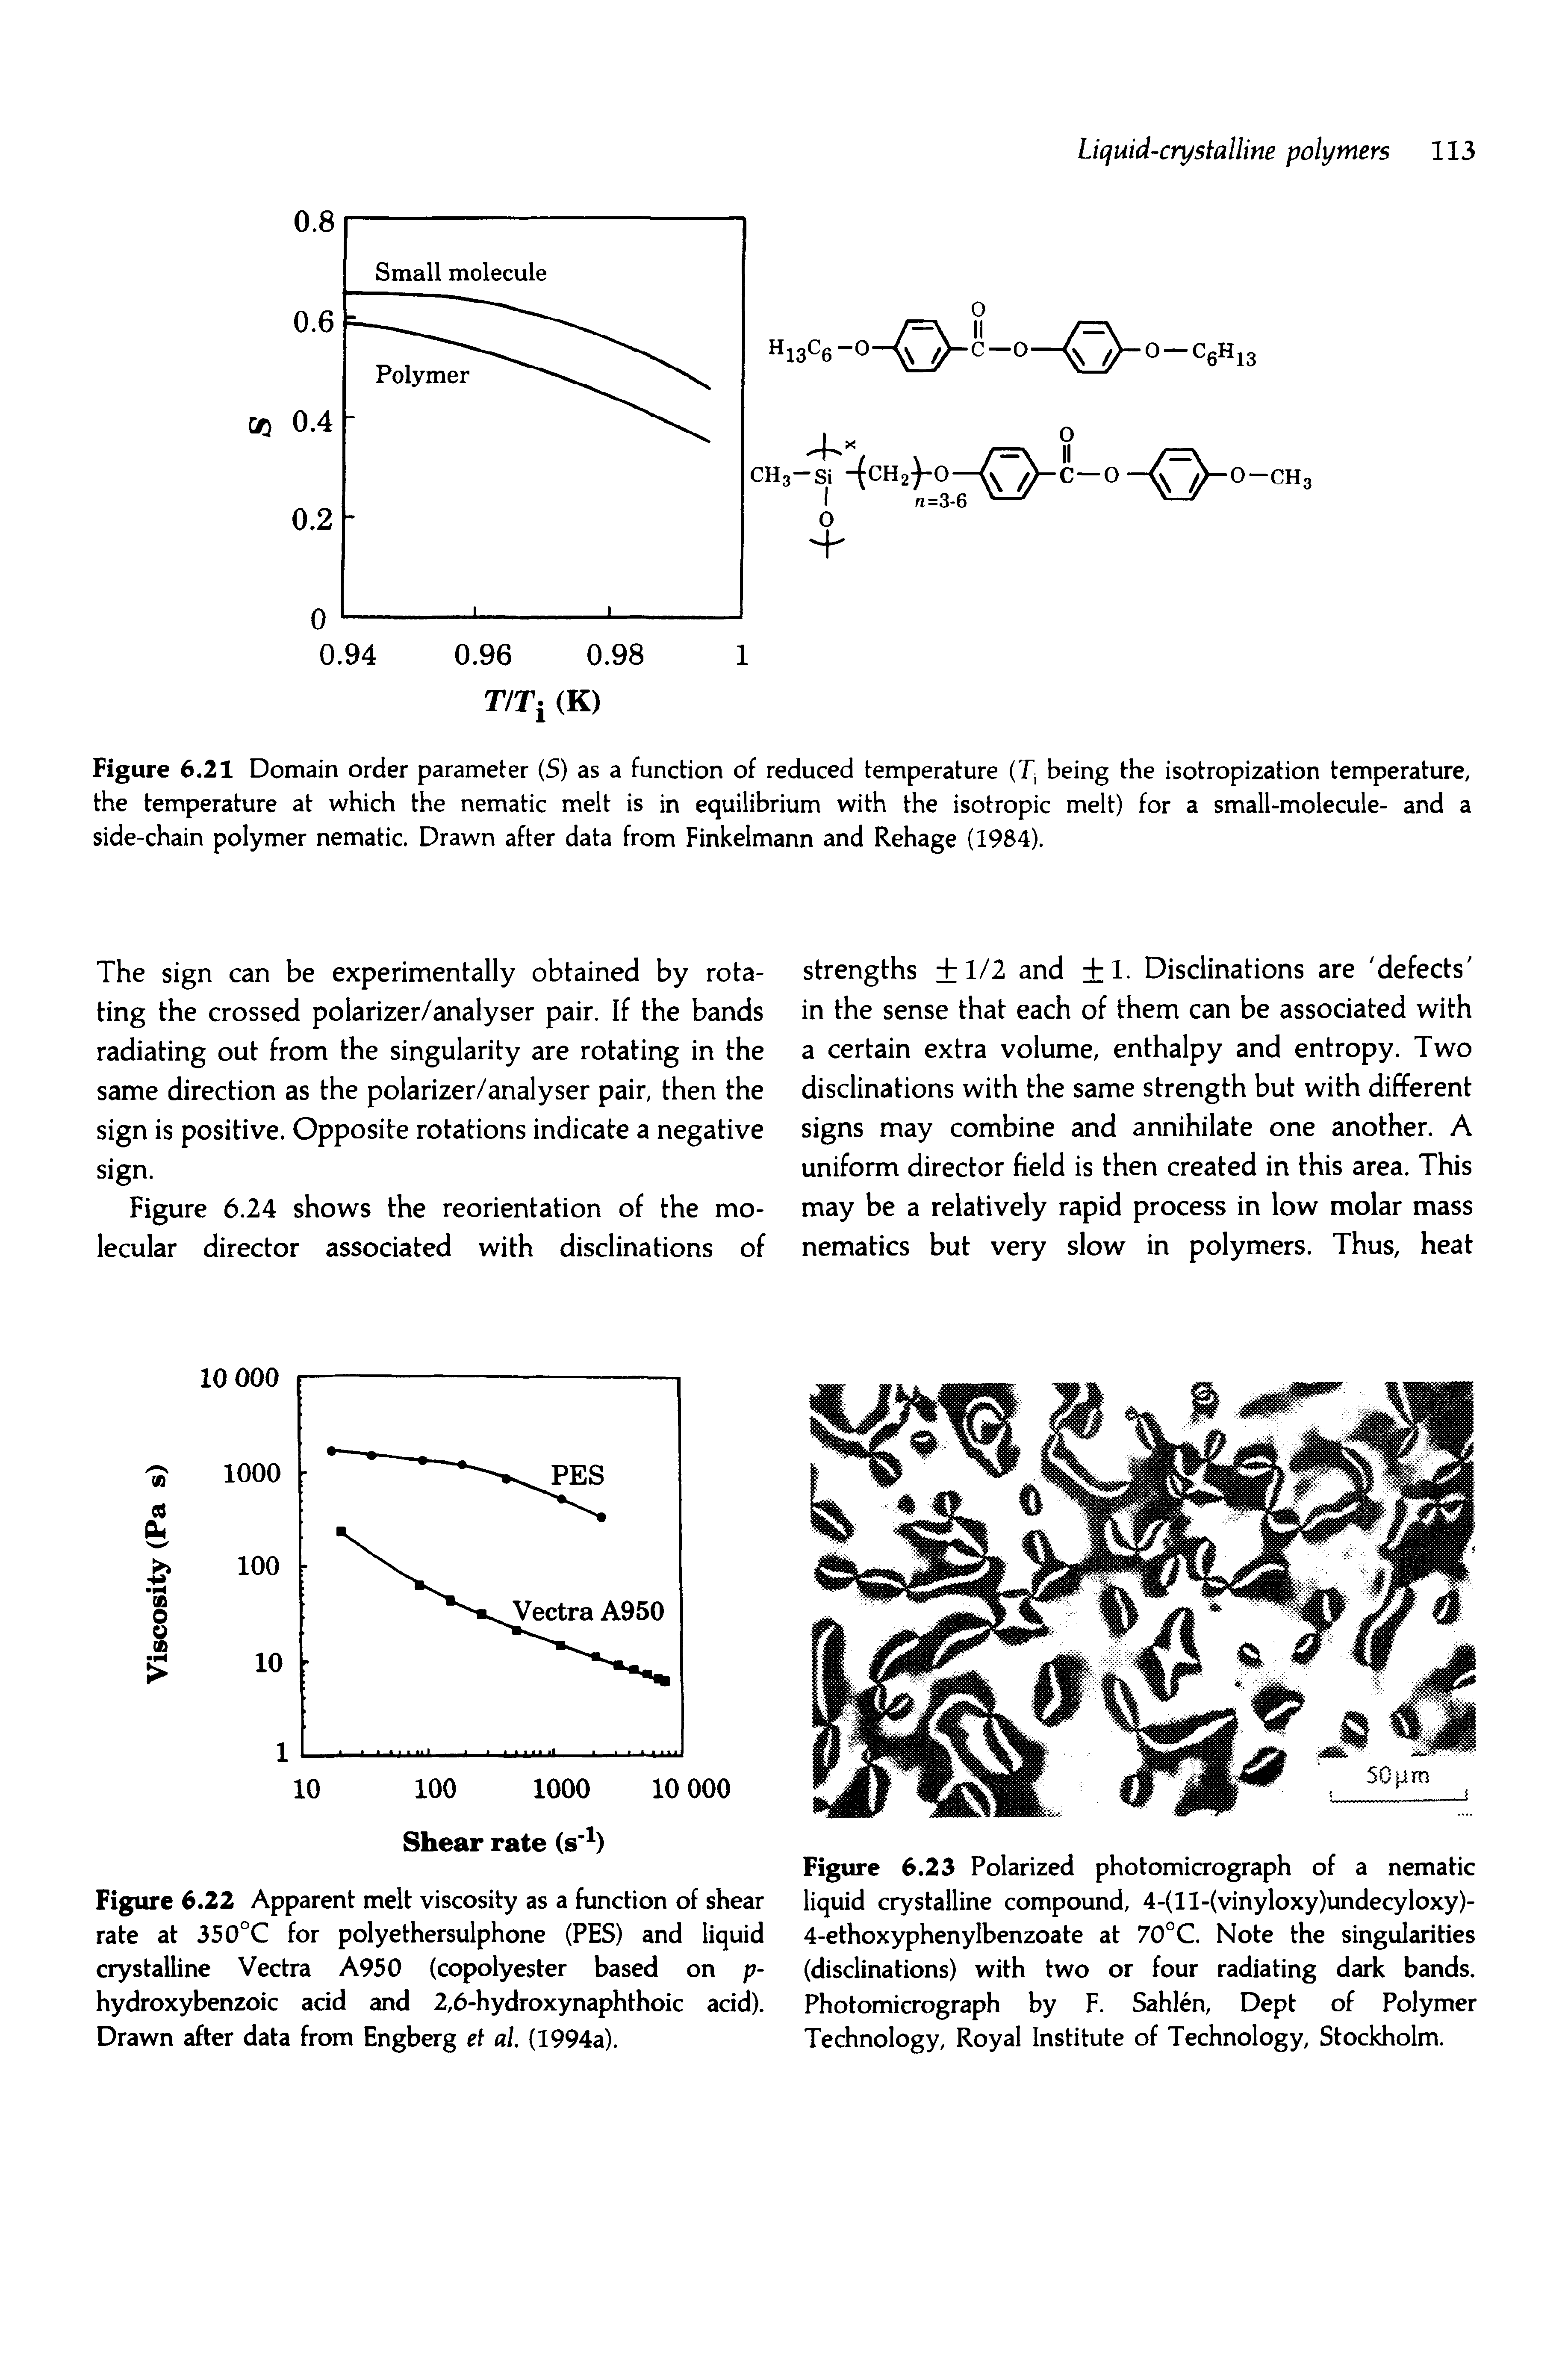 Figure 6.21 Domain order parameter (S) as a function of reduced temperature (Tj being the isotropization temperature, the temperature at which the nematic melt is in equilibrium with the isotropic melt) for a small-molecule- and a side-chain polymer nematic. Drawn after data from Finkelmann and Rehage (1984).